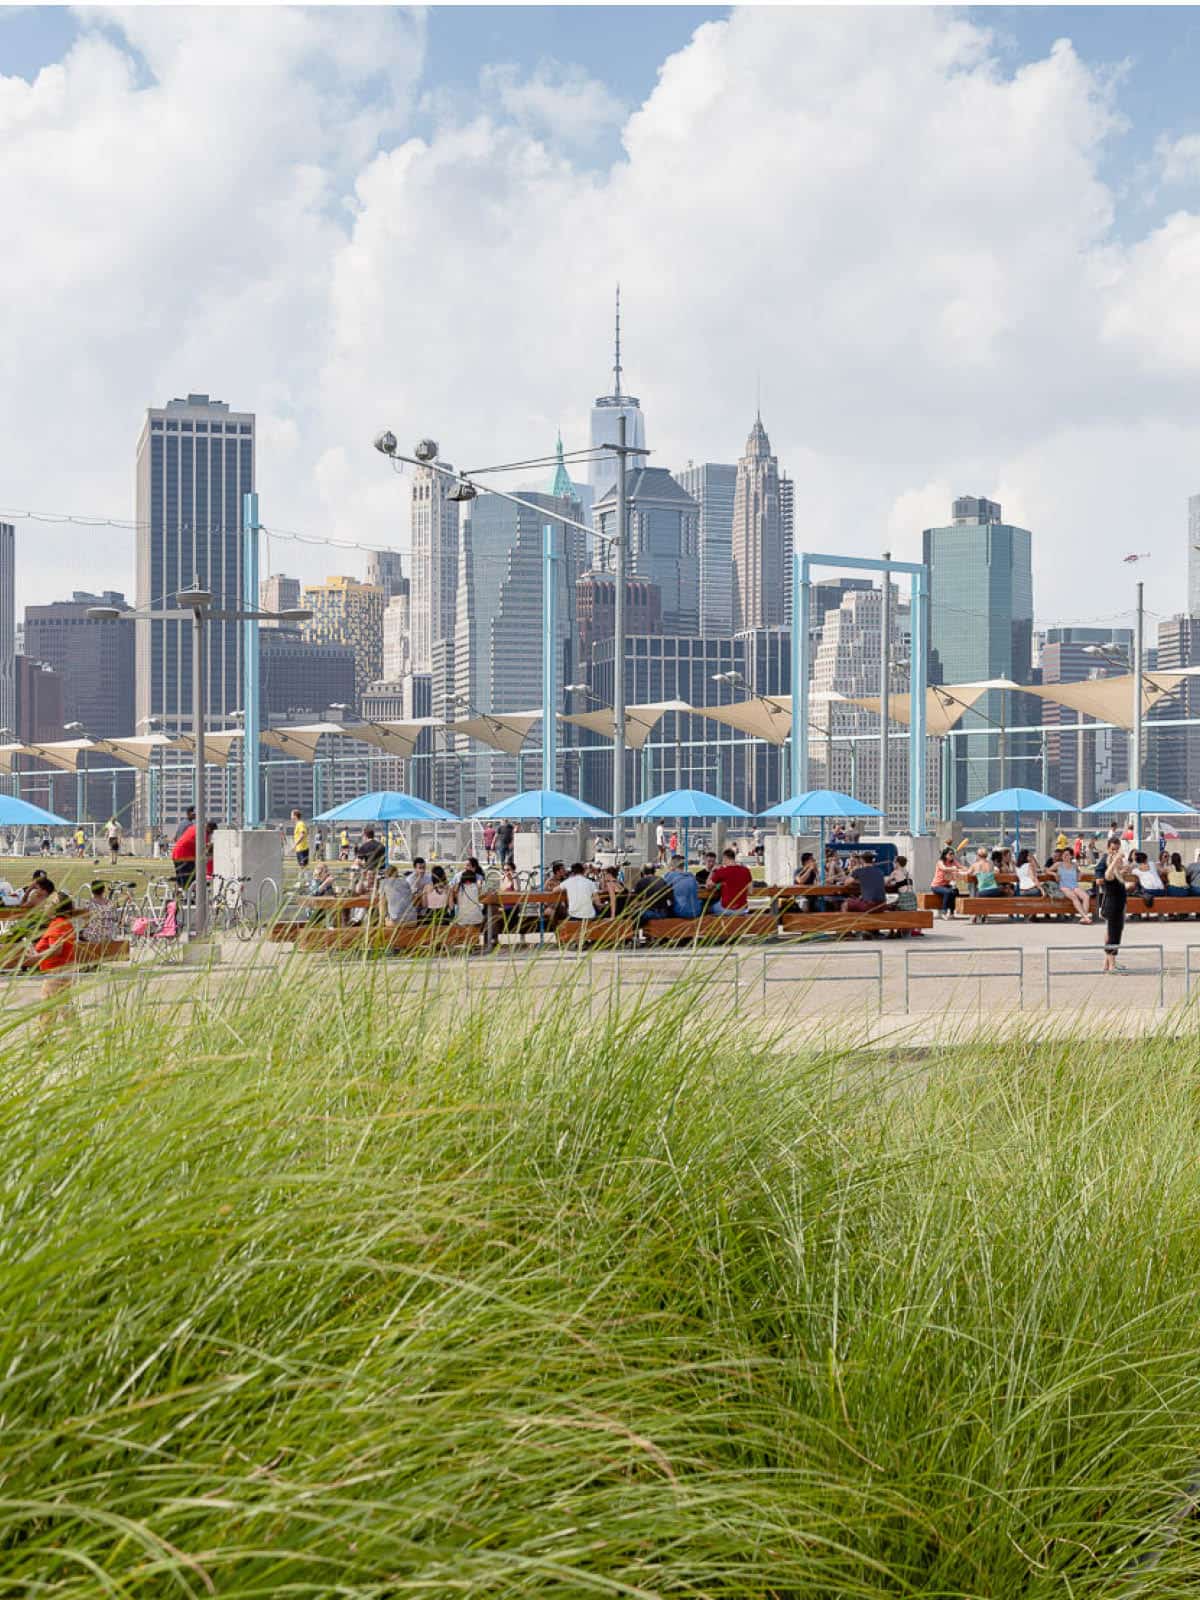 Picnic area seen from behind grasses on a cloudy day. Lower Manhattan is seen in the background.